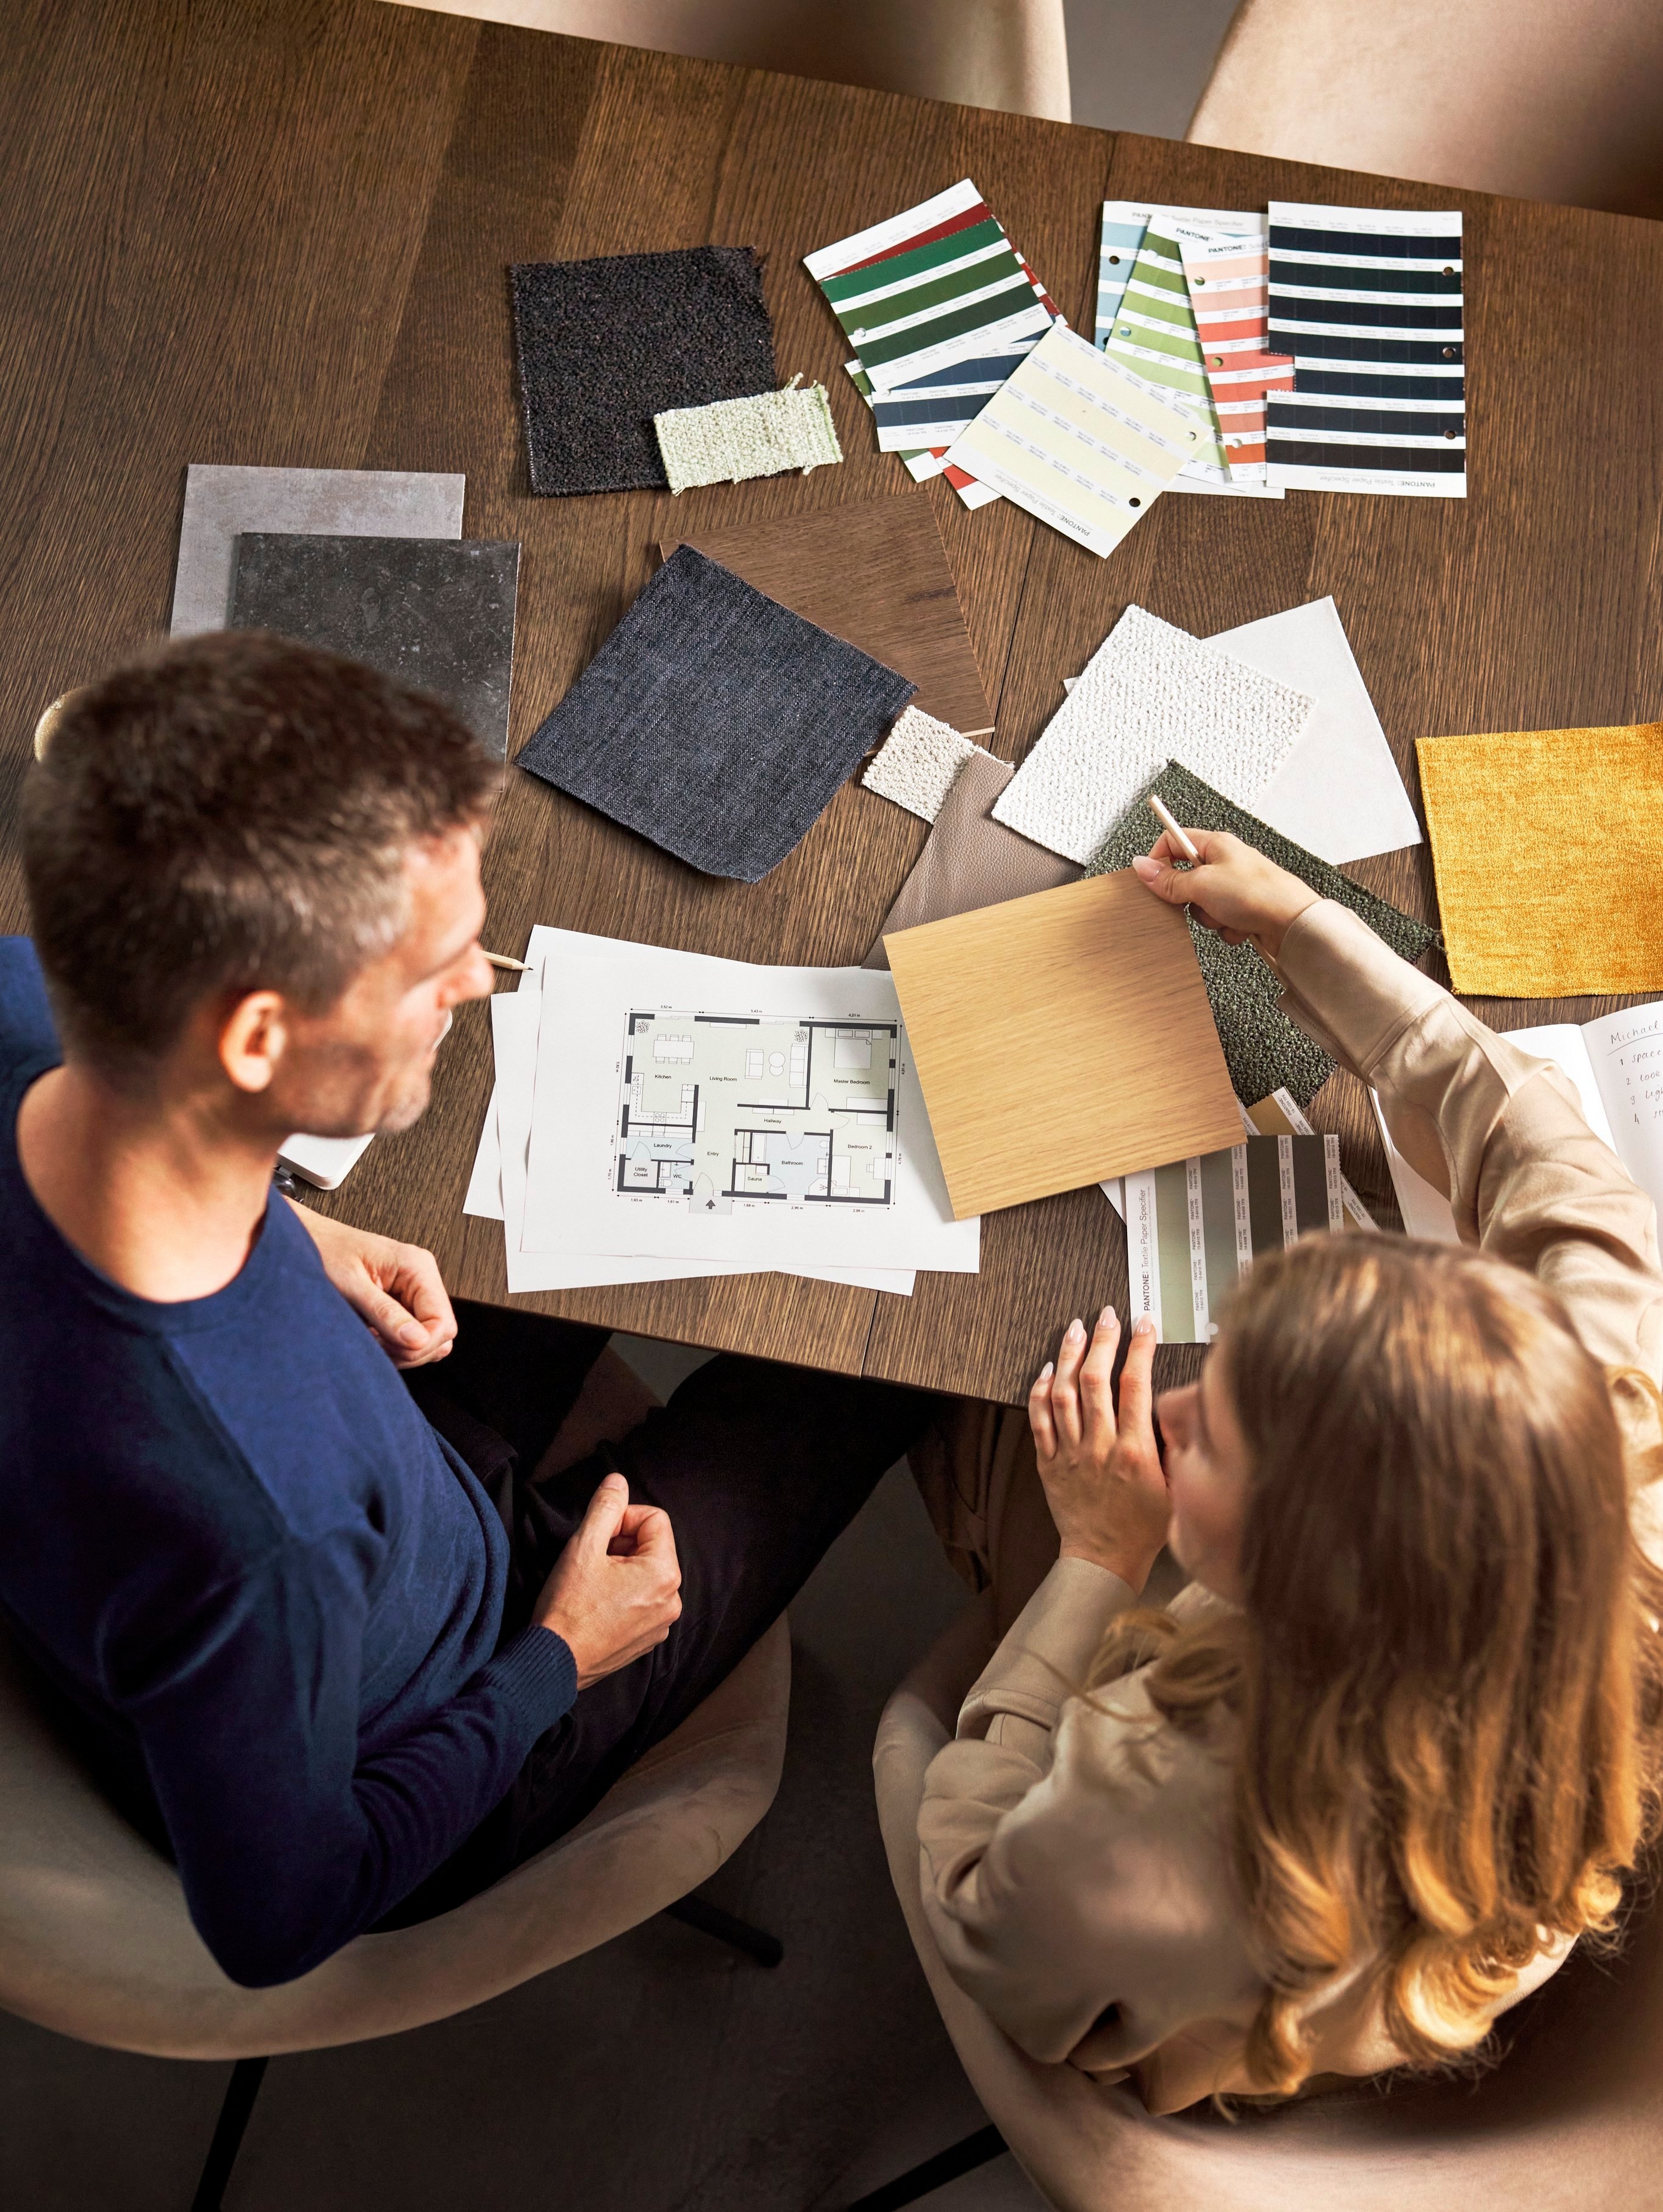 Overhead view of two people discussing material samples and floor plans at a table.